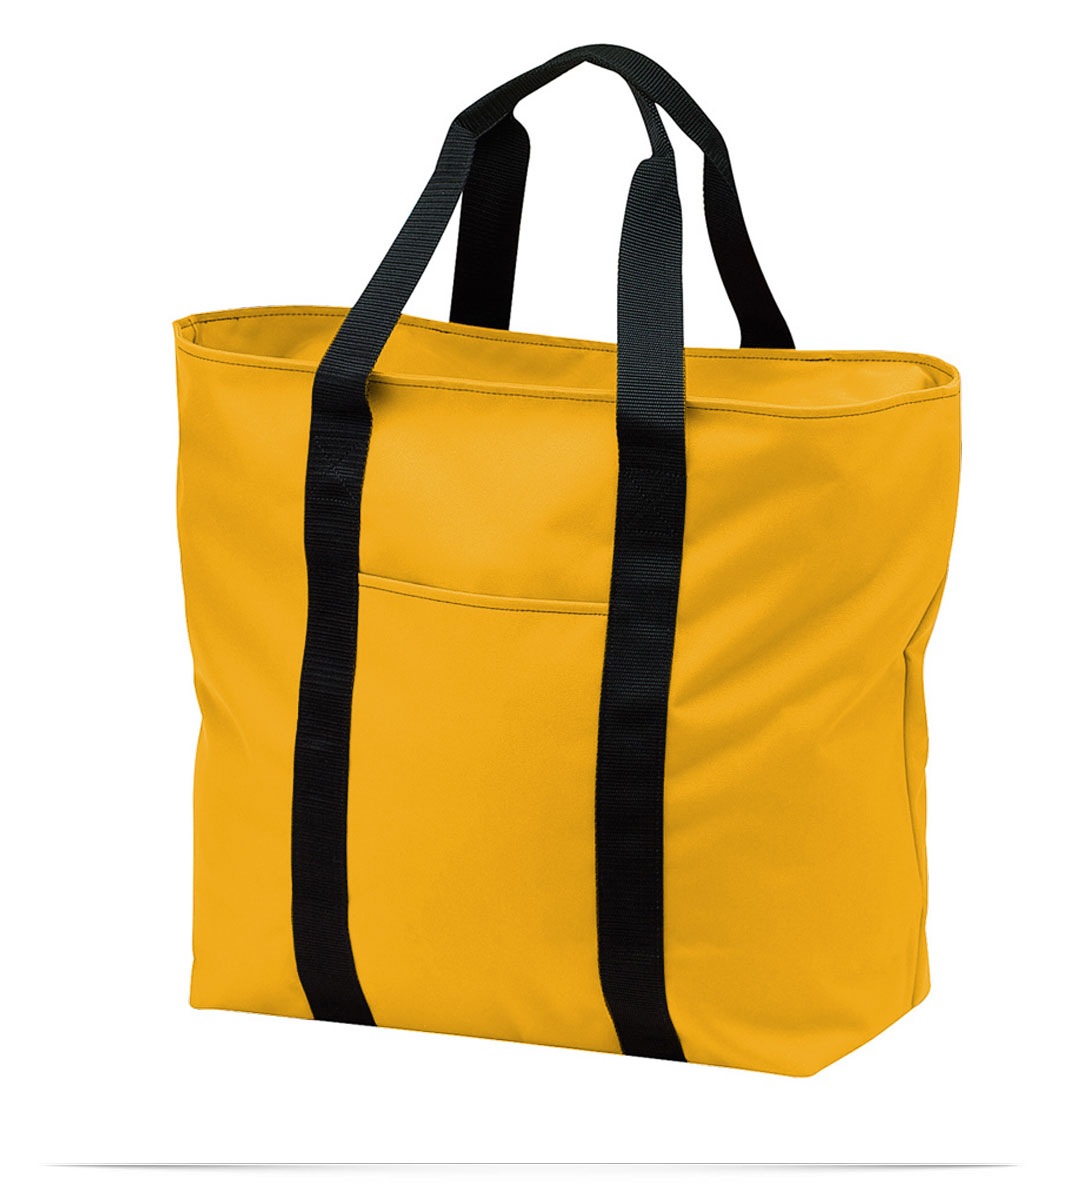 Personalized Tote Bag